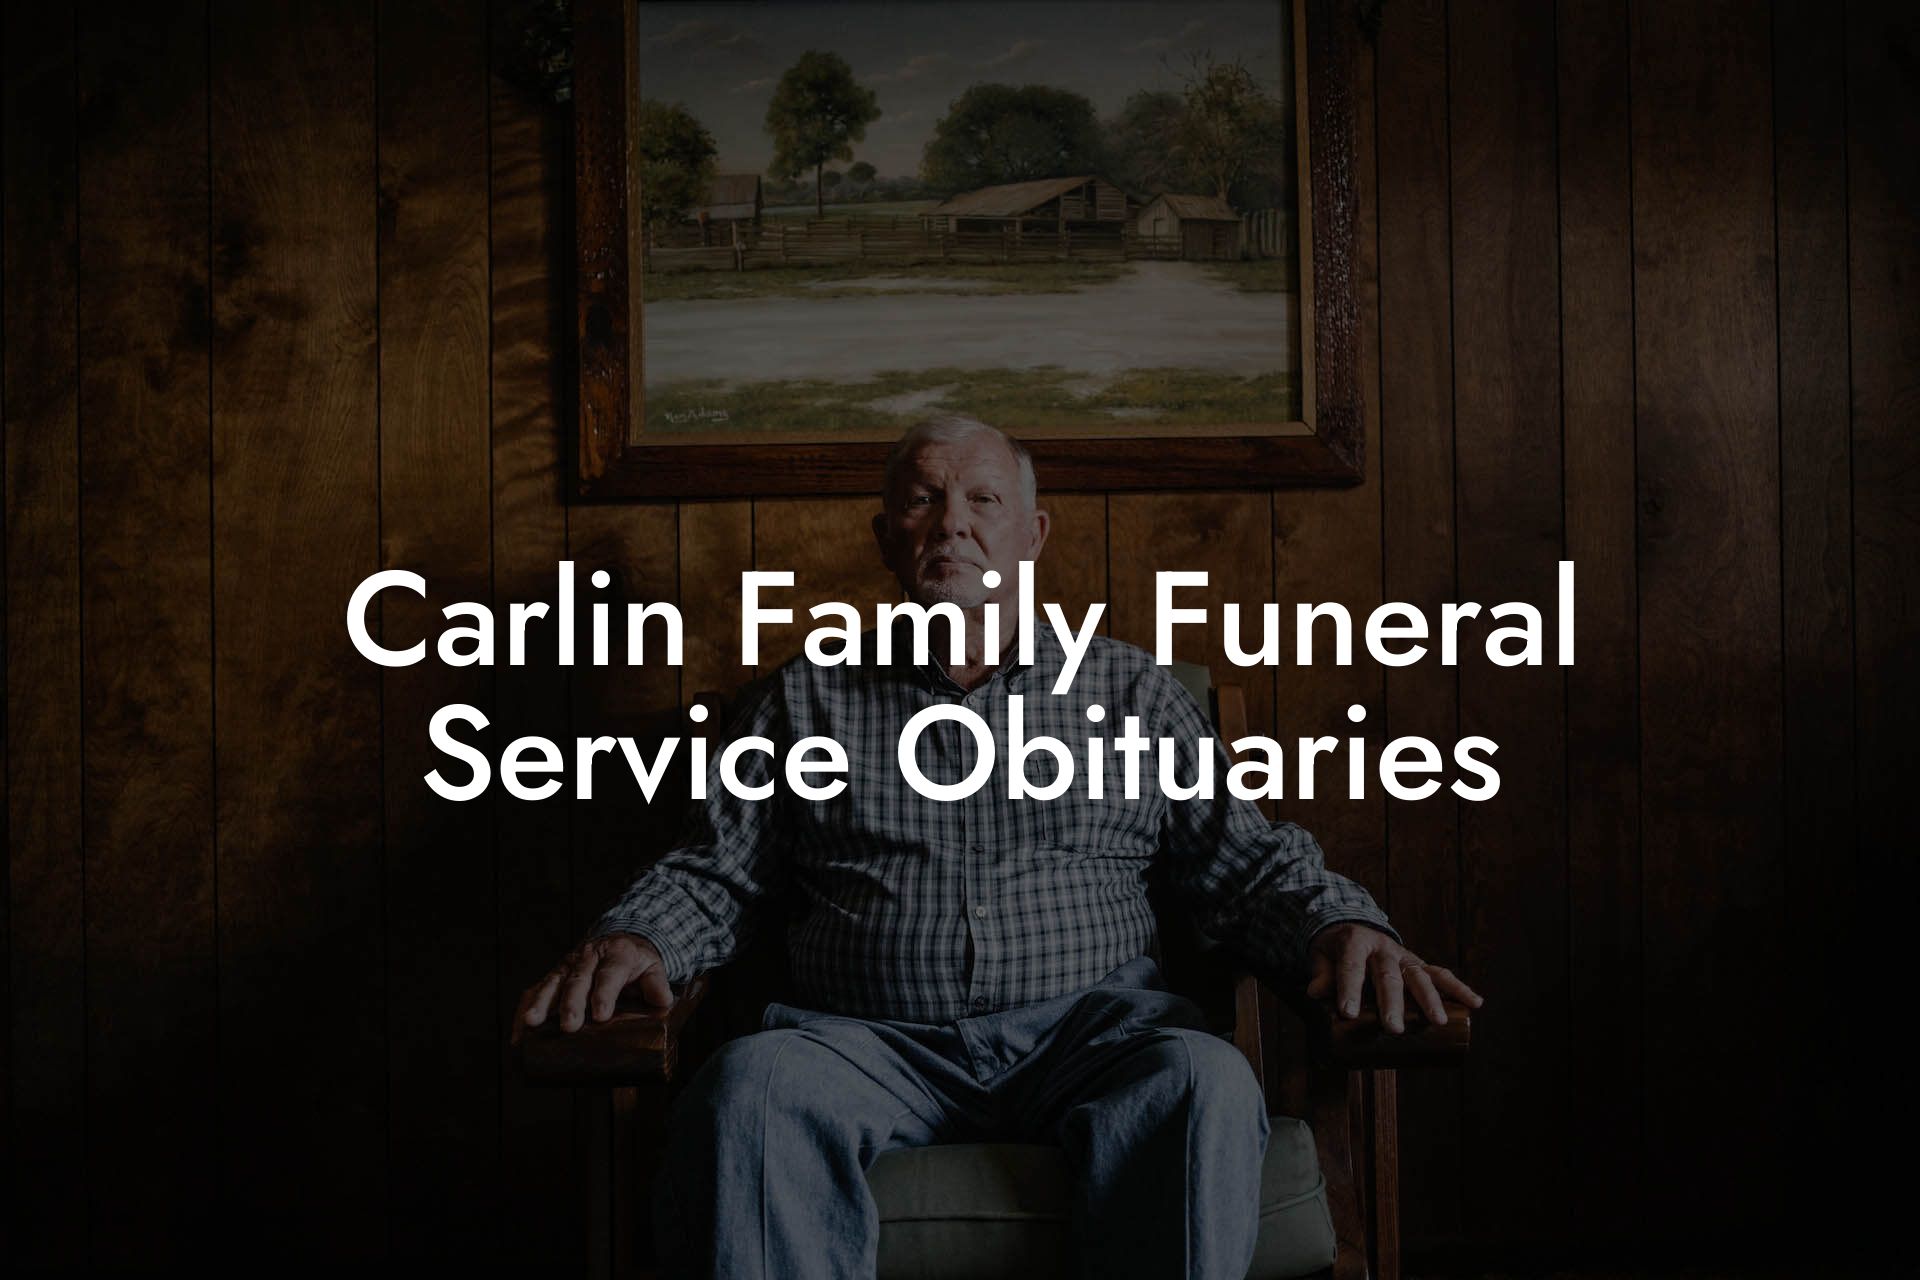 Carlin Family Funeral Service Obituaries